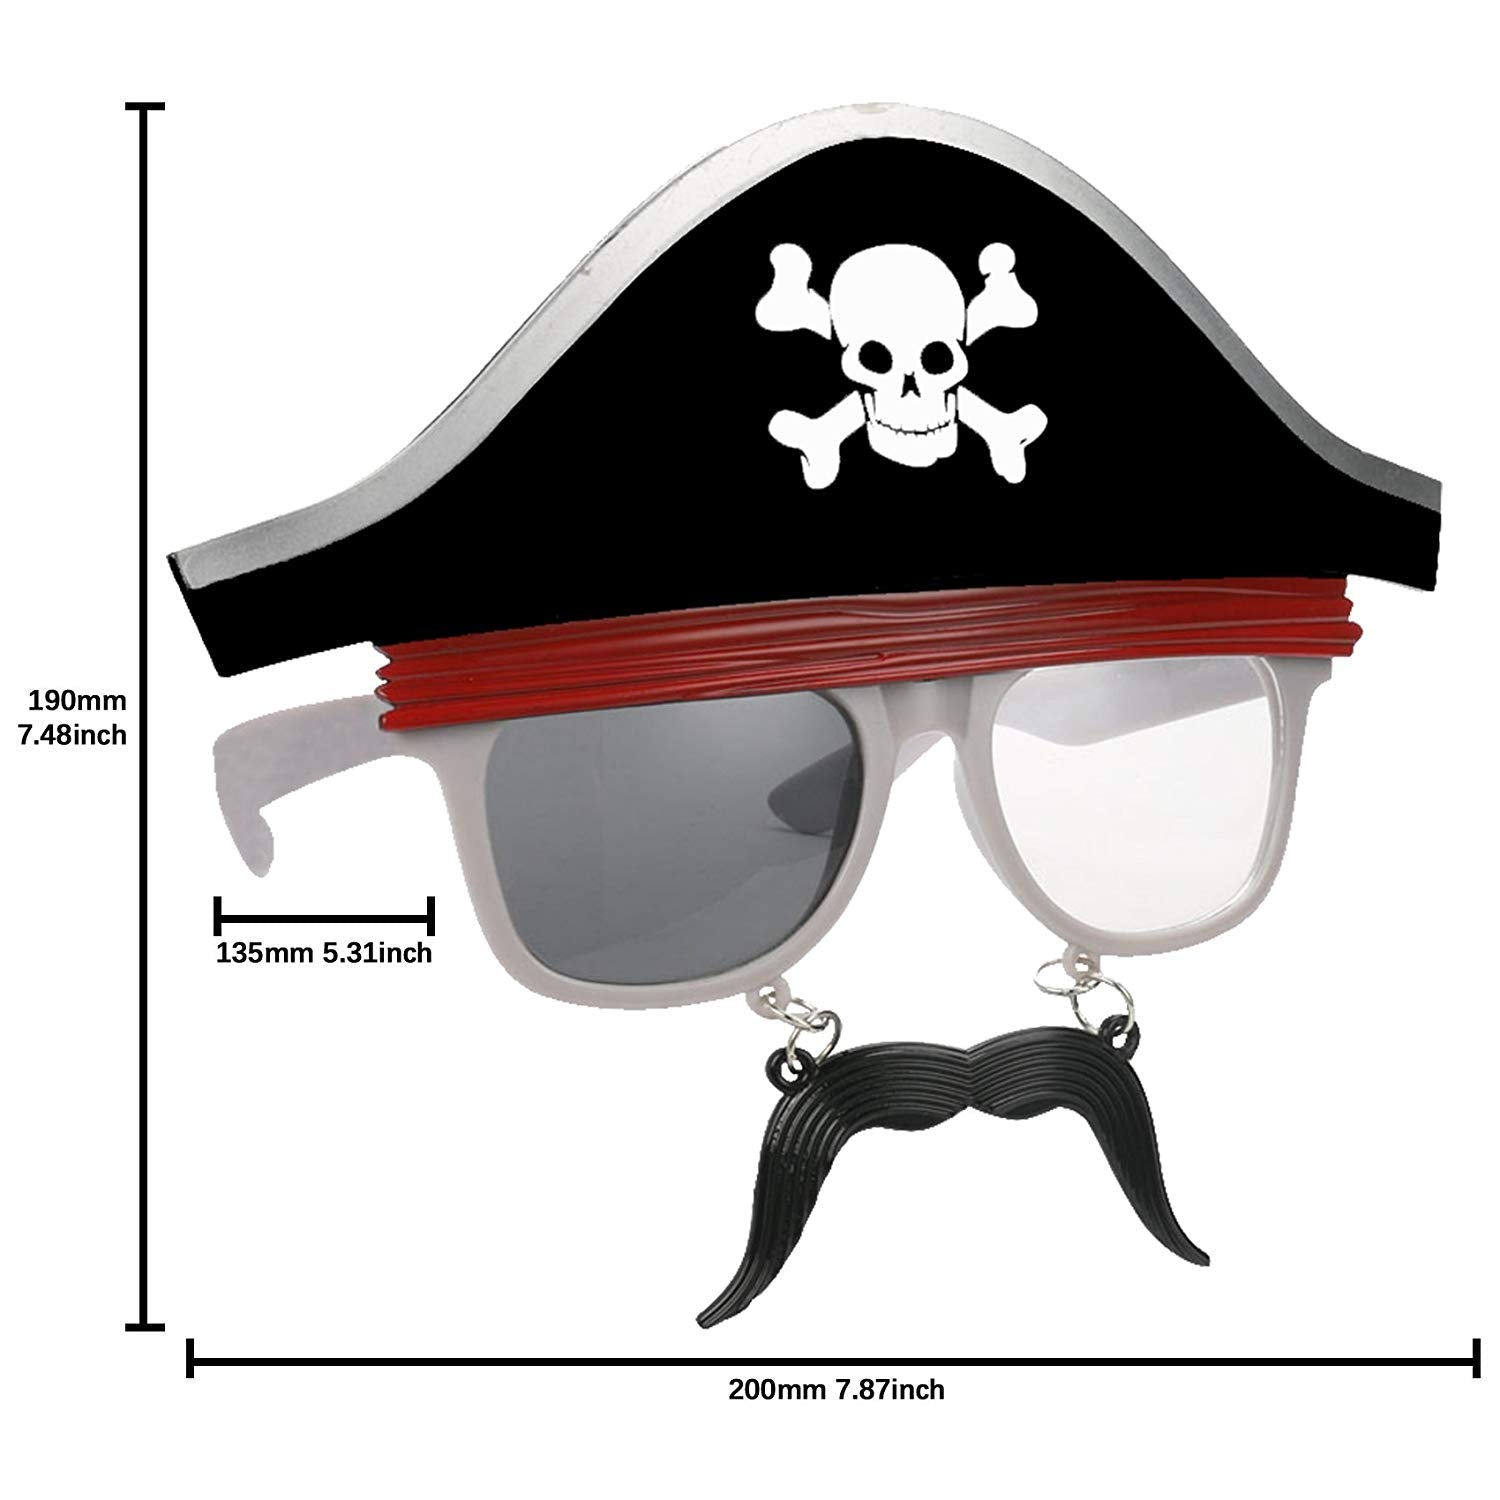 Pirate Hat with Mustache Party Costume Sunglasses Fun Shades